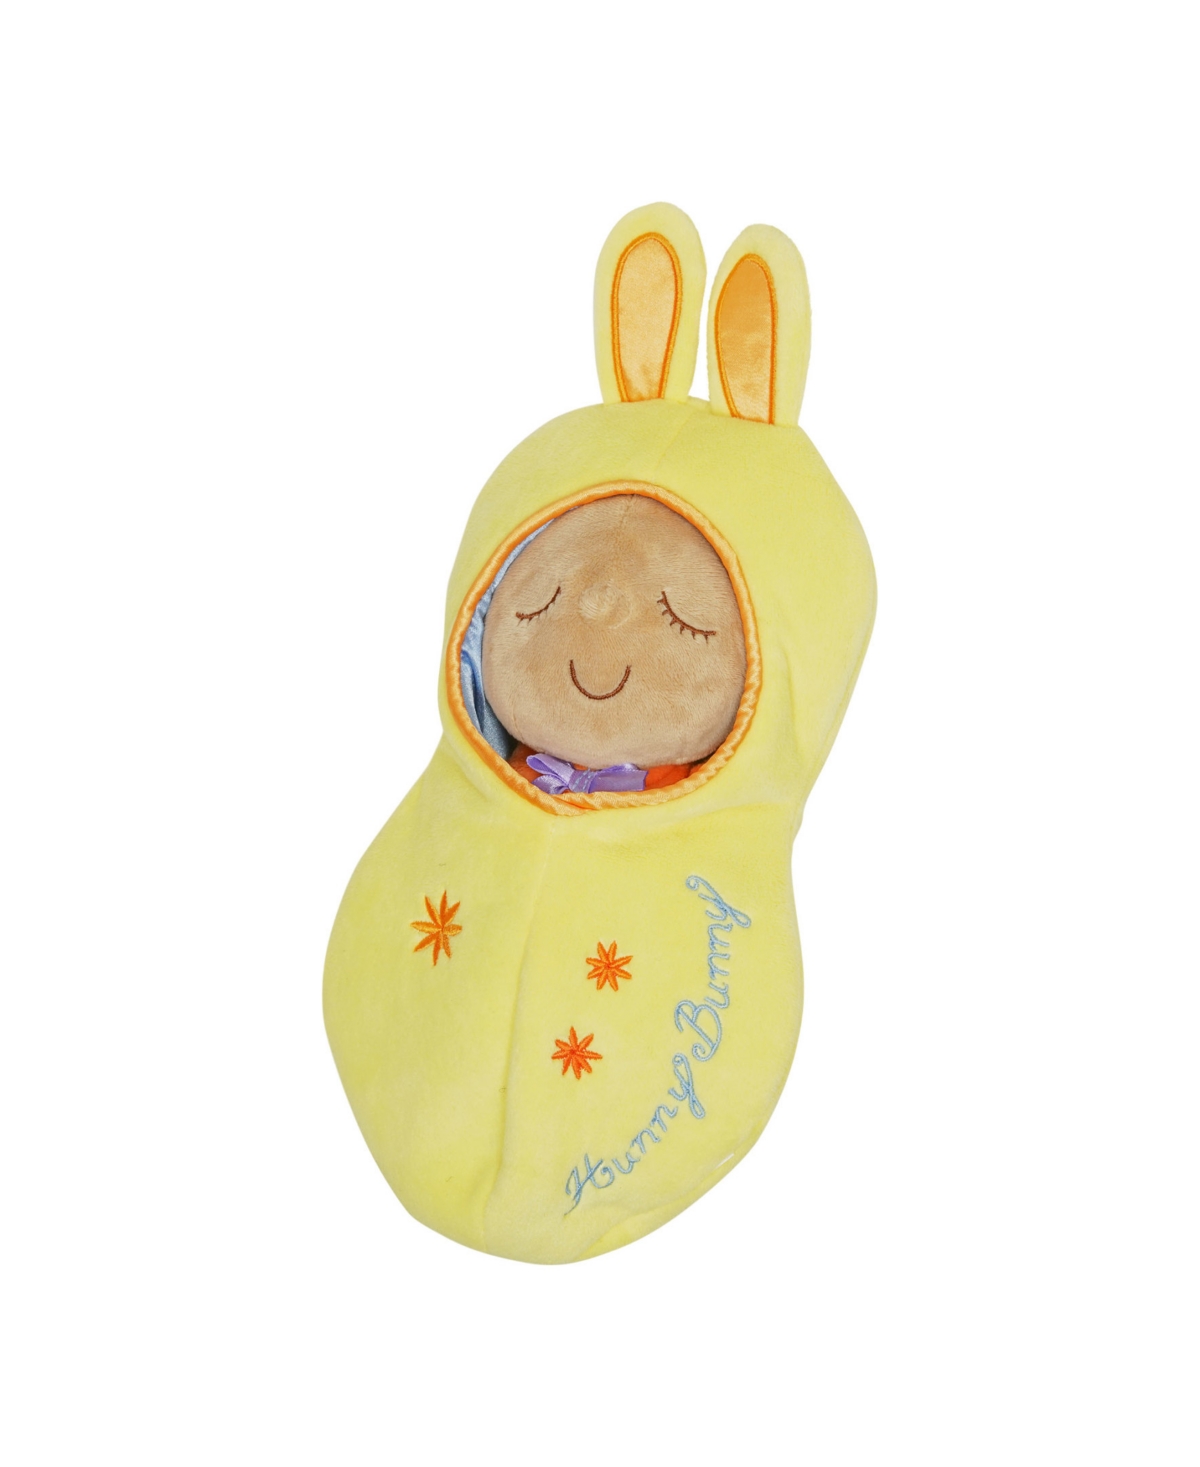 Manhattan Toy Company Kids' Snuggle Pod Hunny Bunny Beige First Baby Doll With Cozy Sleep Sack In Multicolor